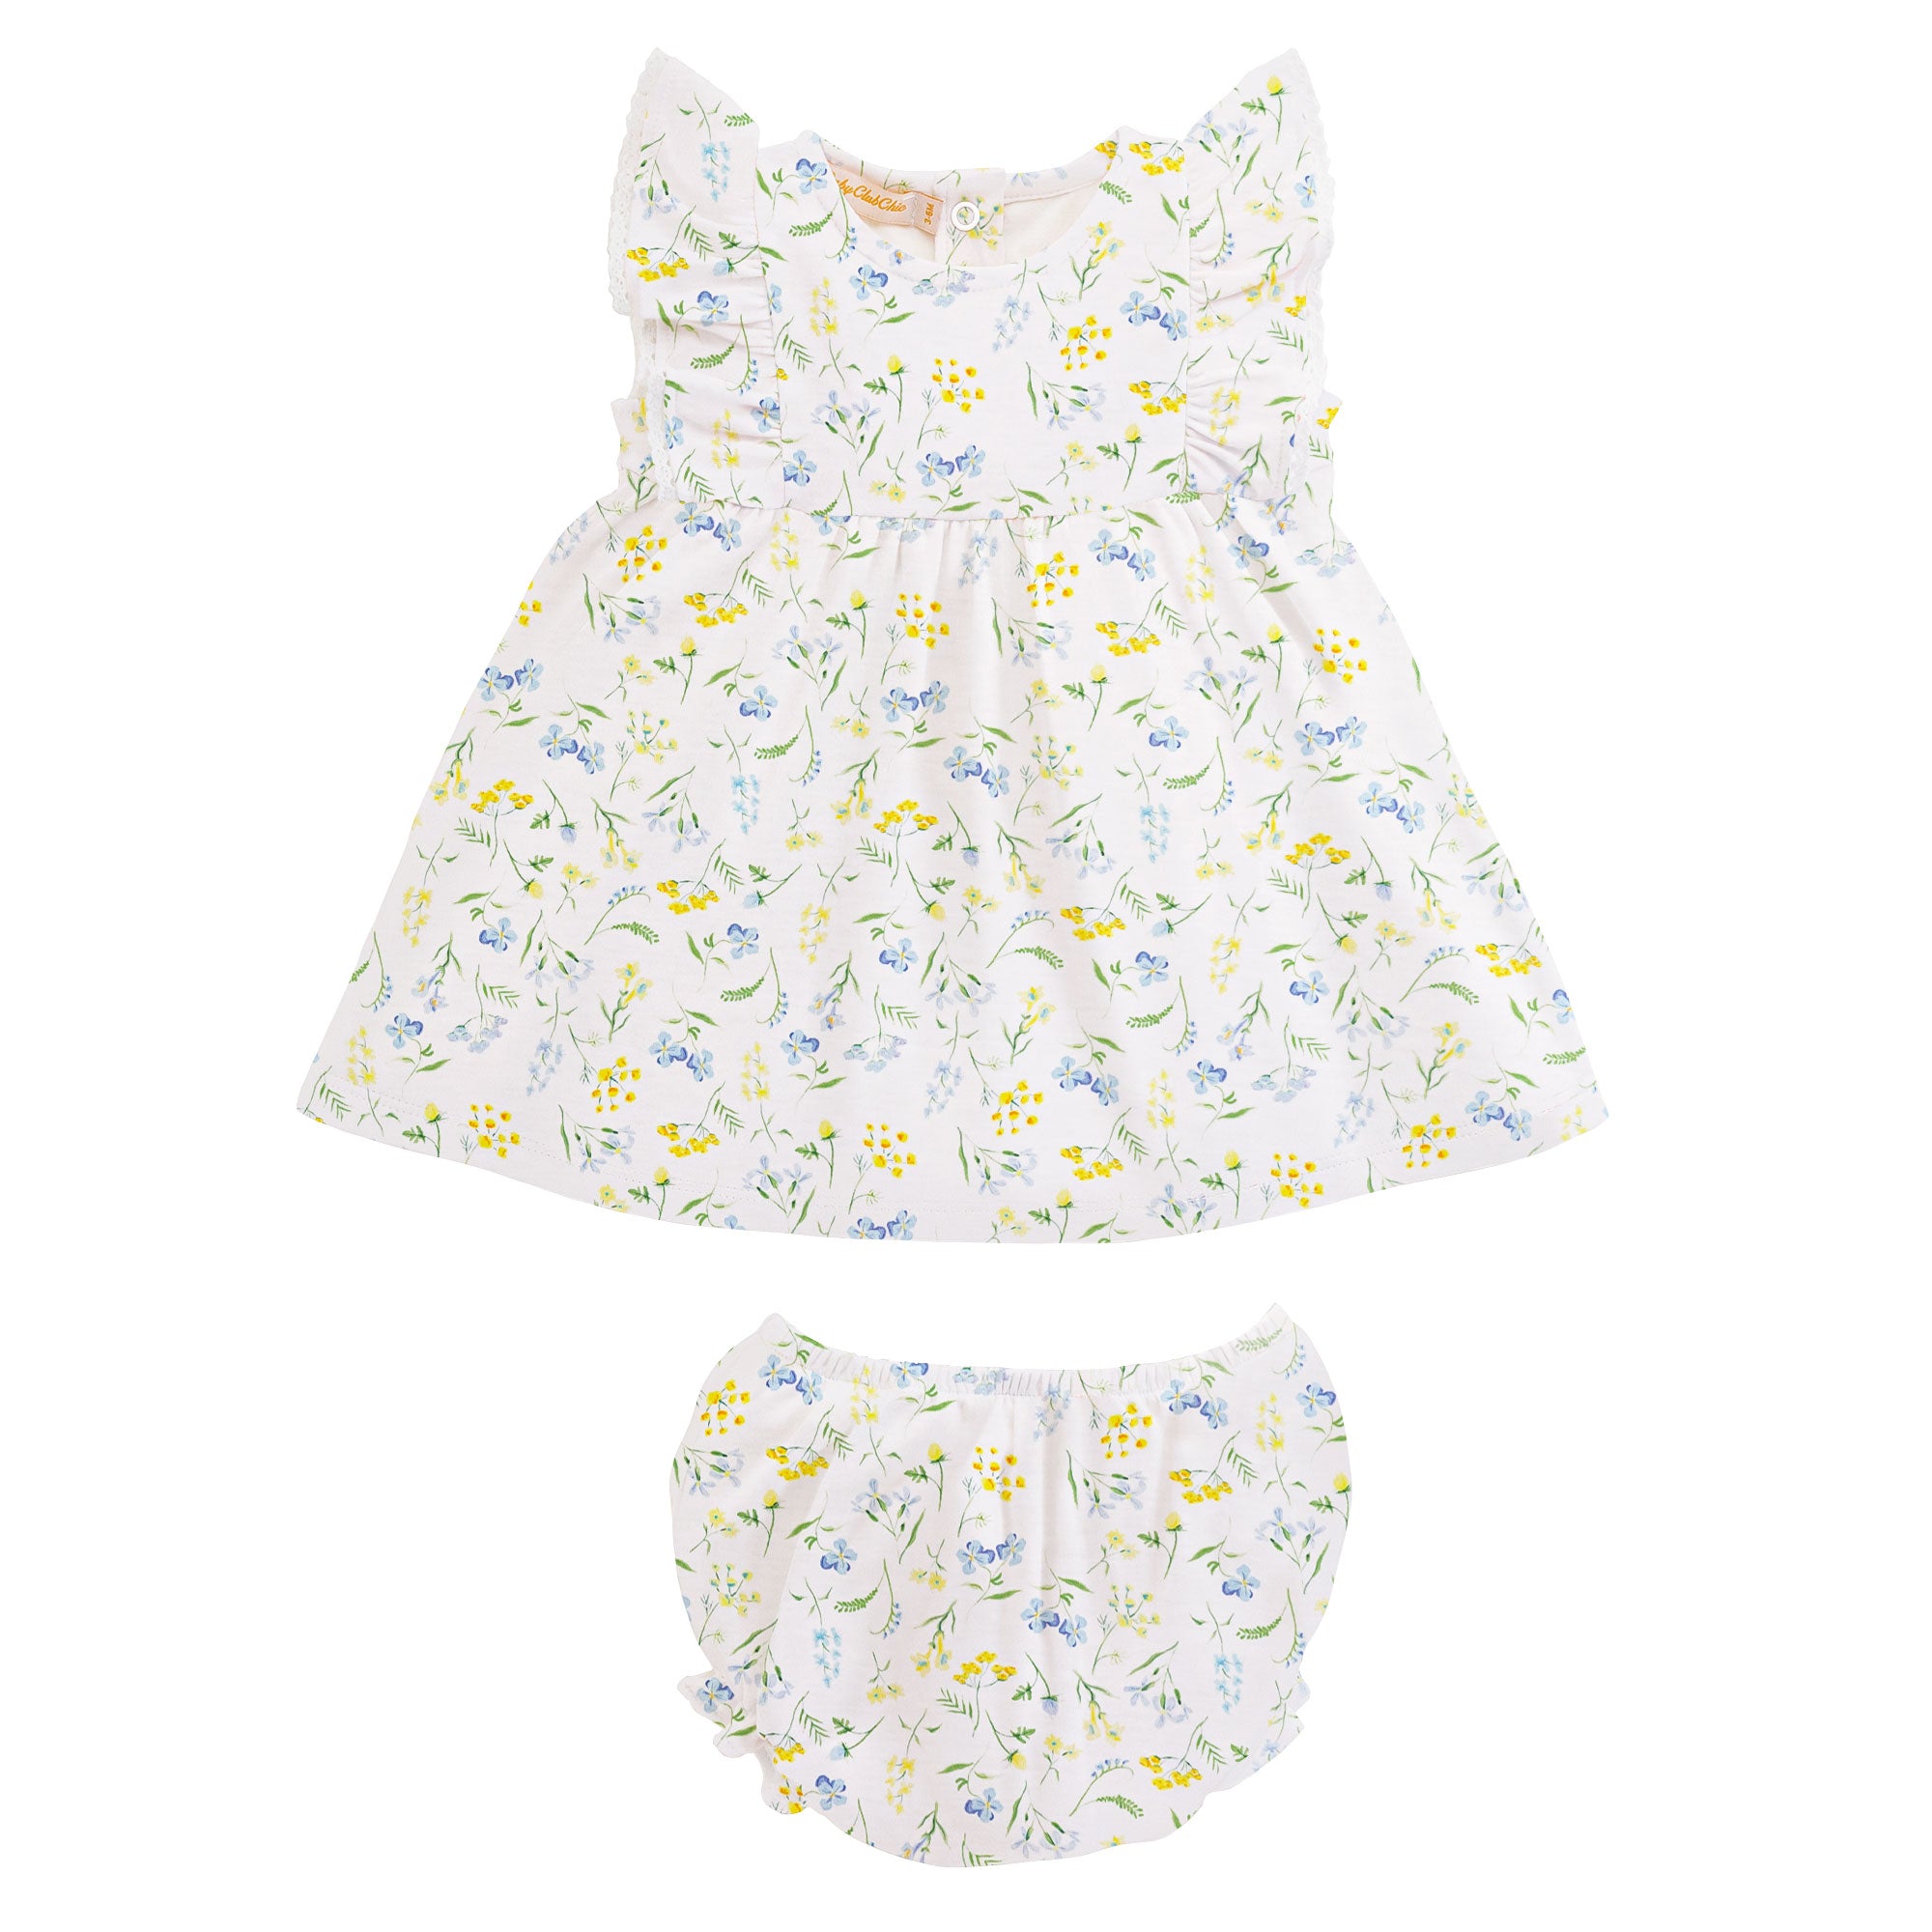 Delicate Wildflowers Dress Set with Ruffle